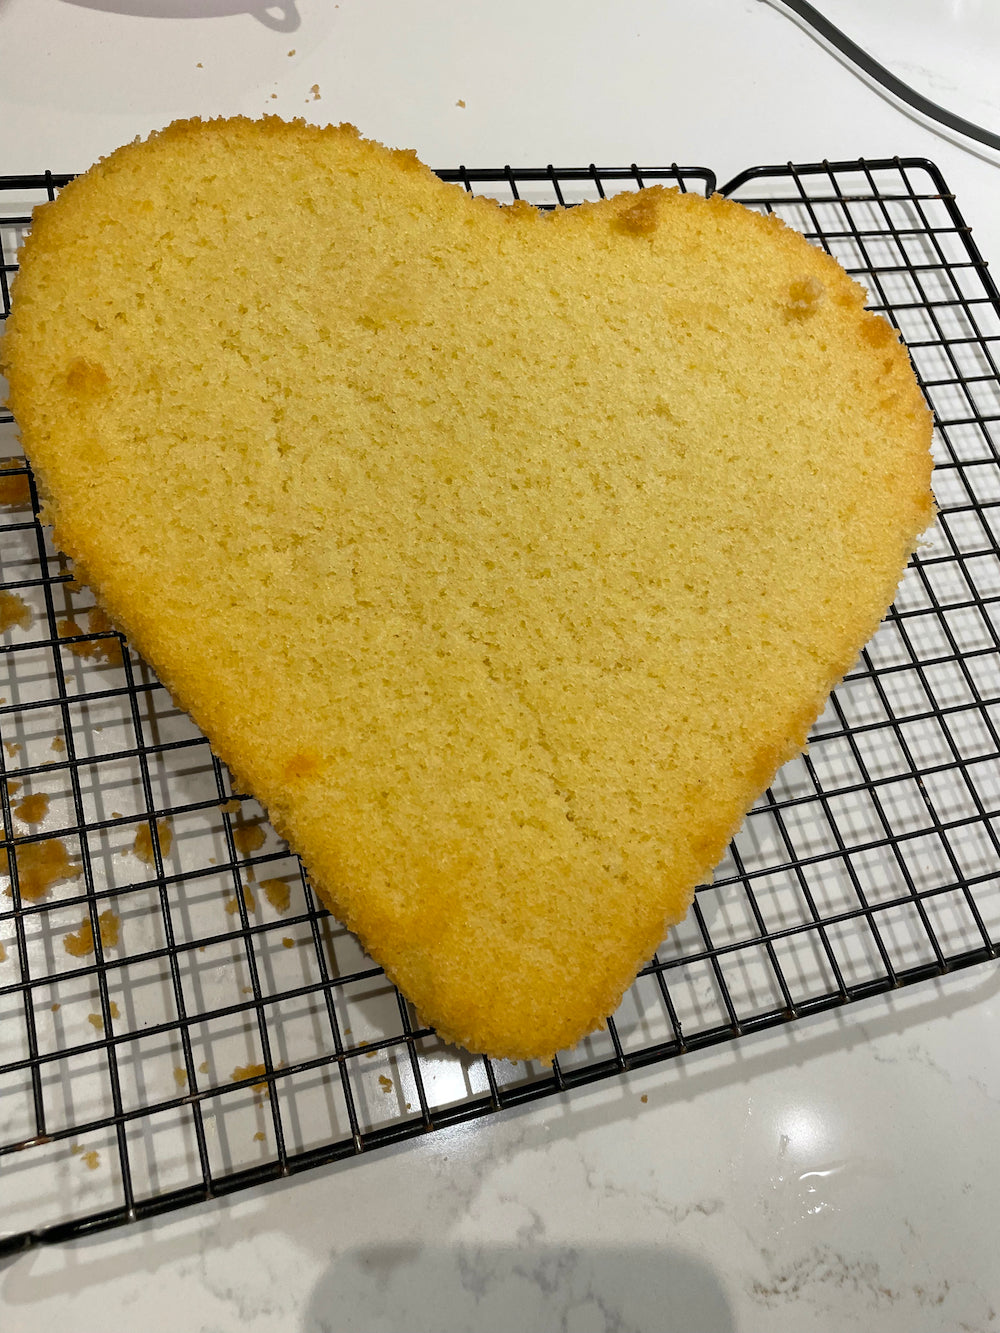 Charlotte and Burlington Valentine's French and British love cake recipe for families and children - DIY cooking activity